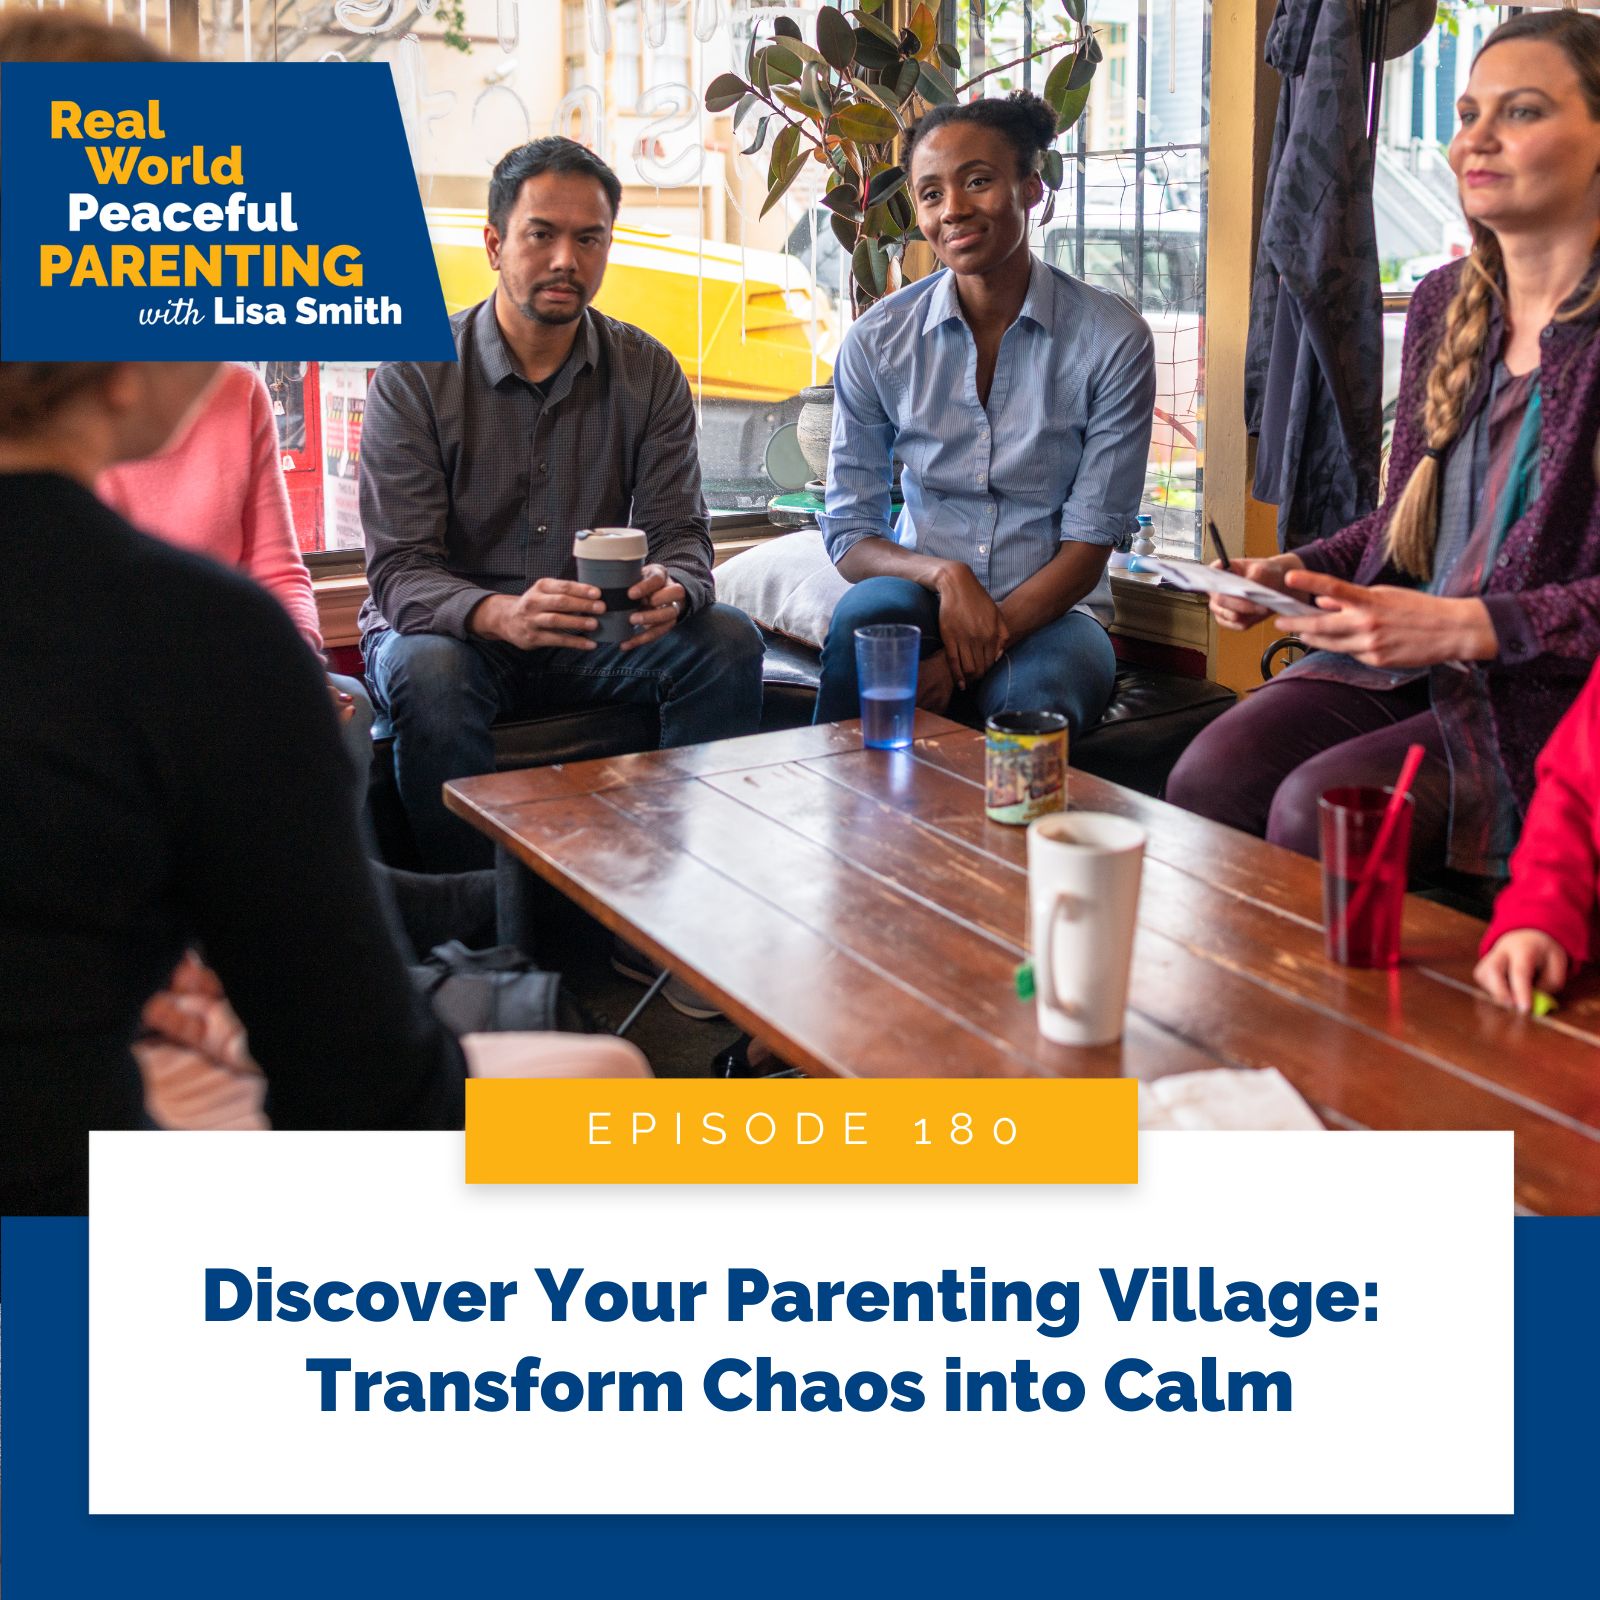 Real World Peaceful Parenting with Lisa Smith | Discover Your Parenting Village: Transform Chaos into Calm